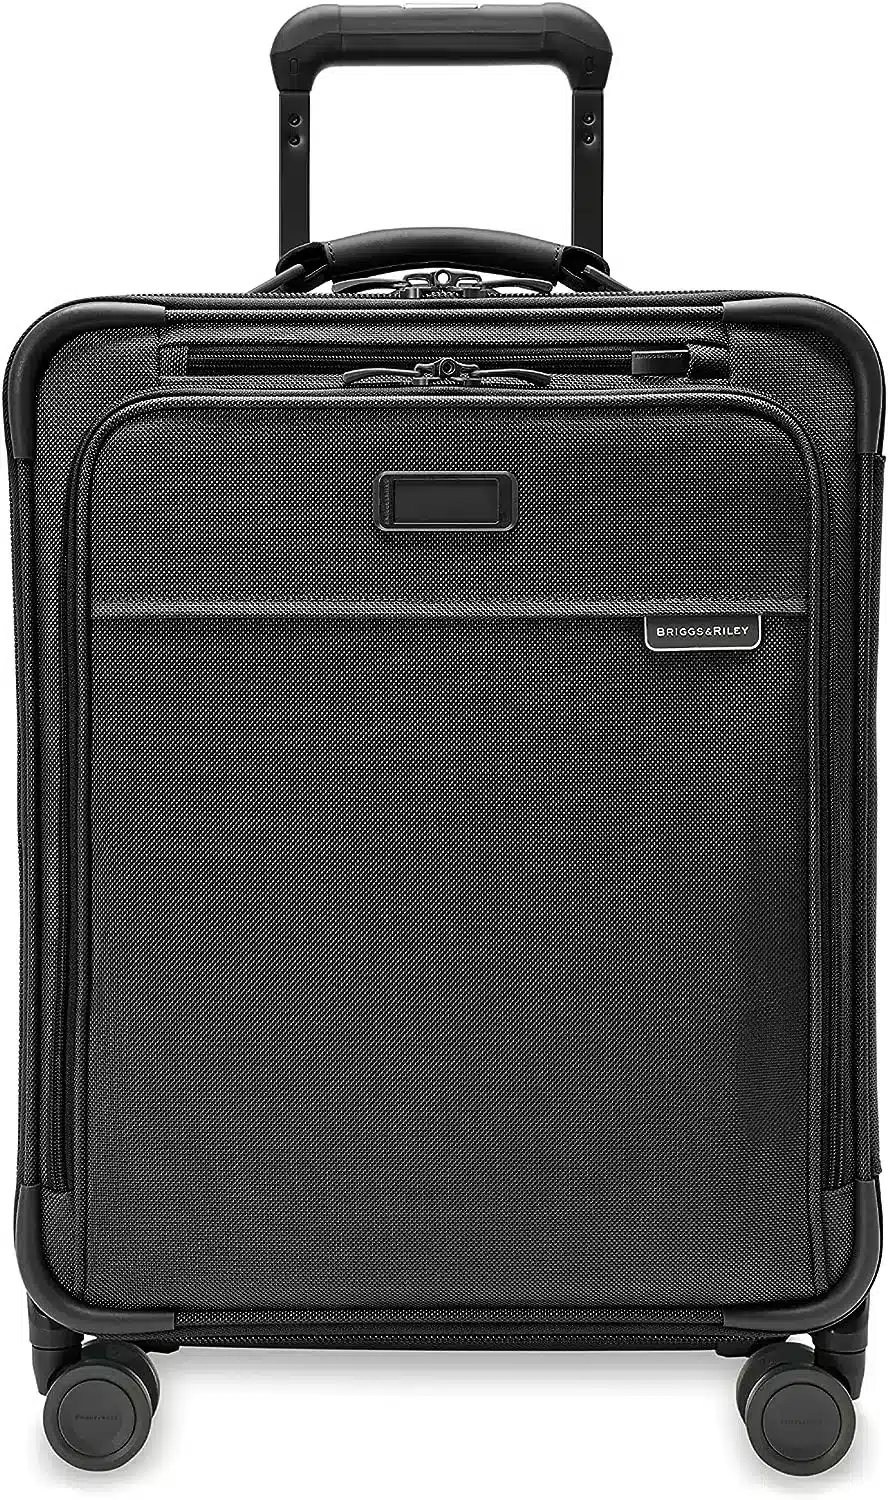 Briggs & Riley 21″ Carry-On Spinner – Worth The Money?